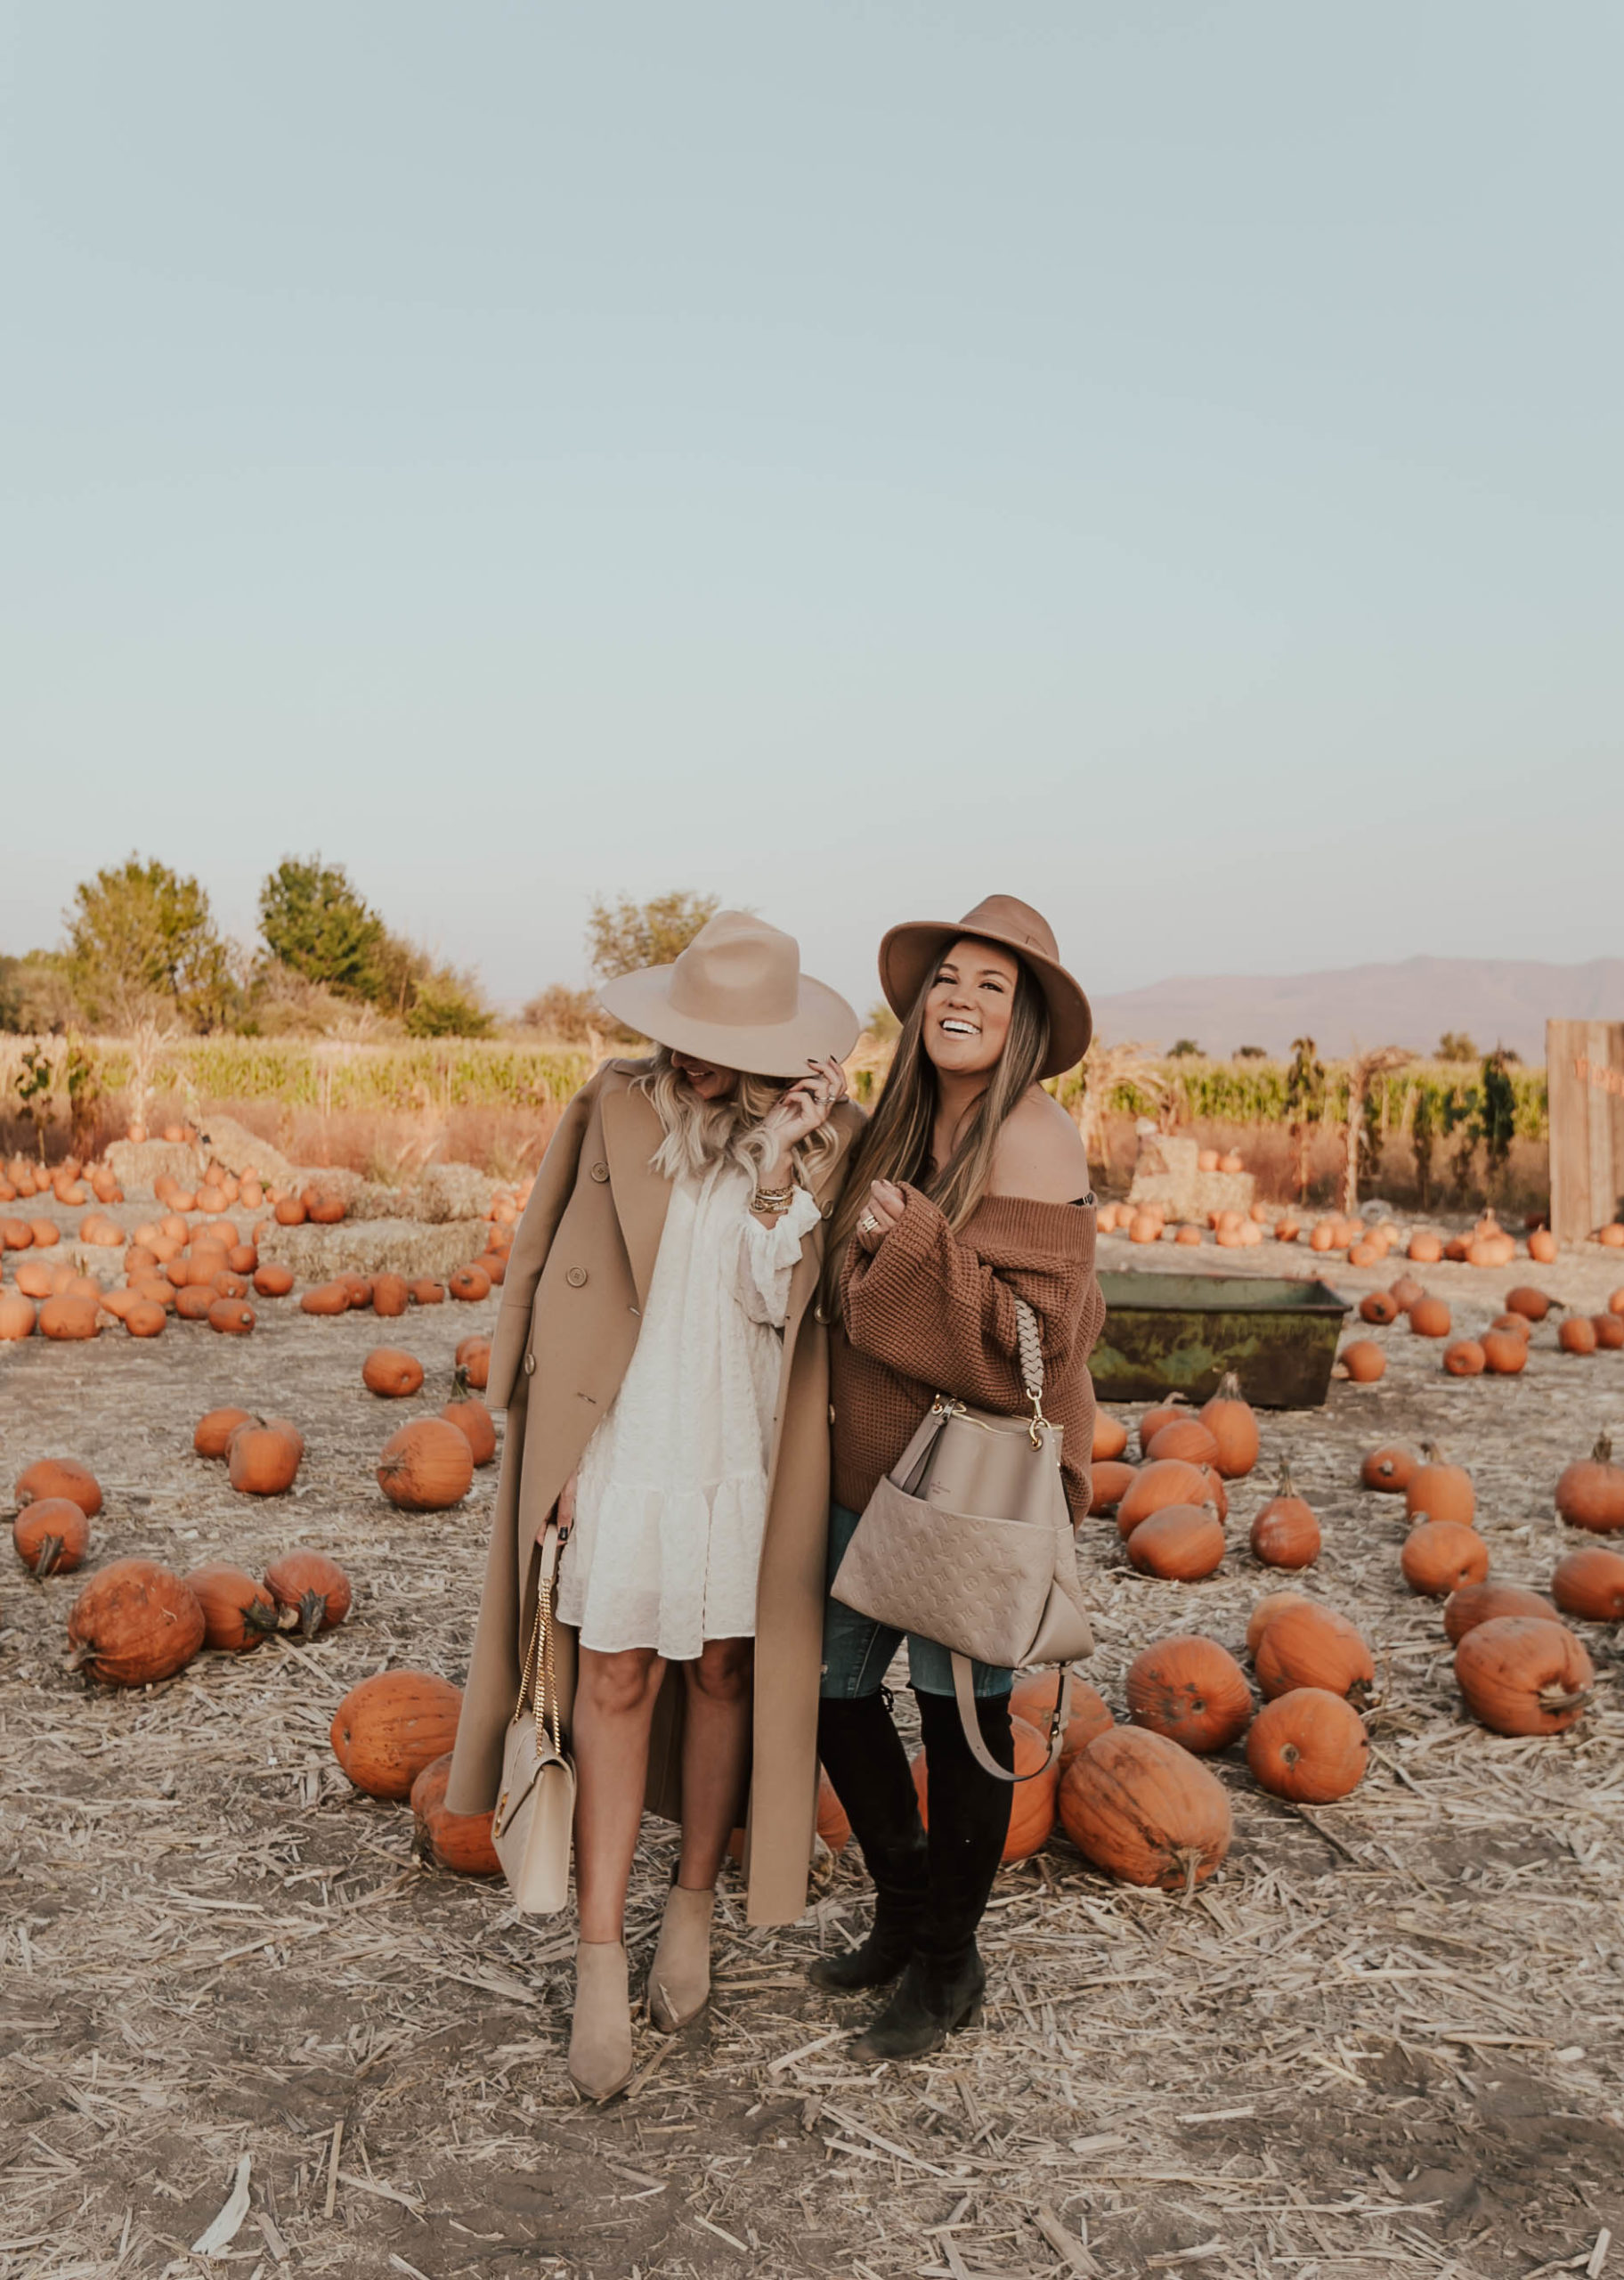 Reno bloggers Ashley Zeal Hurd and Emily Wieczorek share Ten Fall Things to Do in Reno - the best fall bucket list!